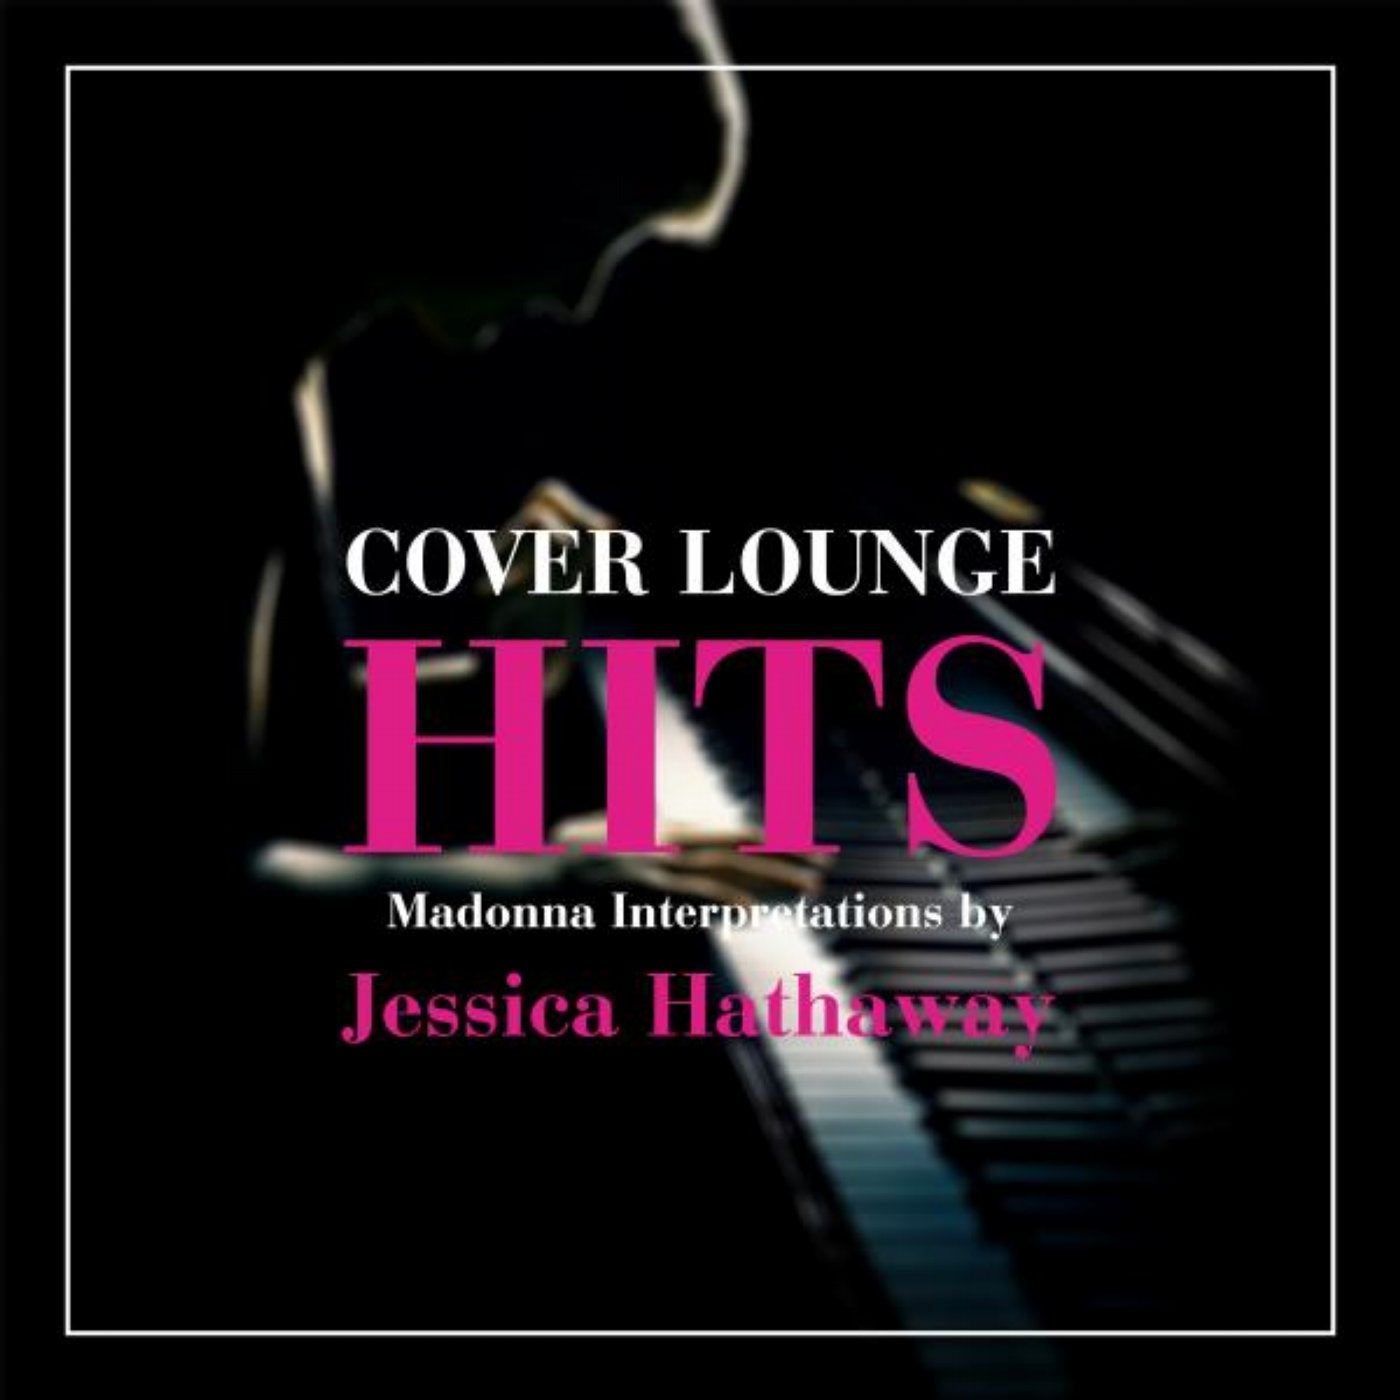 Cover Lounge Hits - Madonna Interpretations by Jessica Hathaway